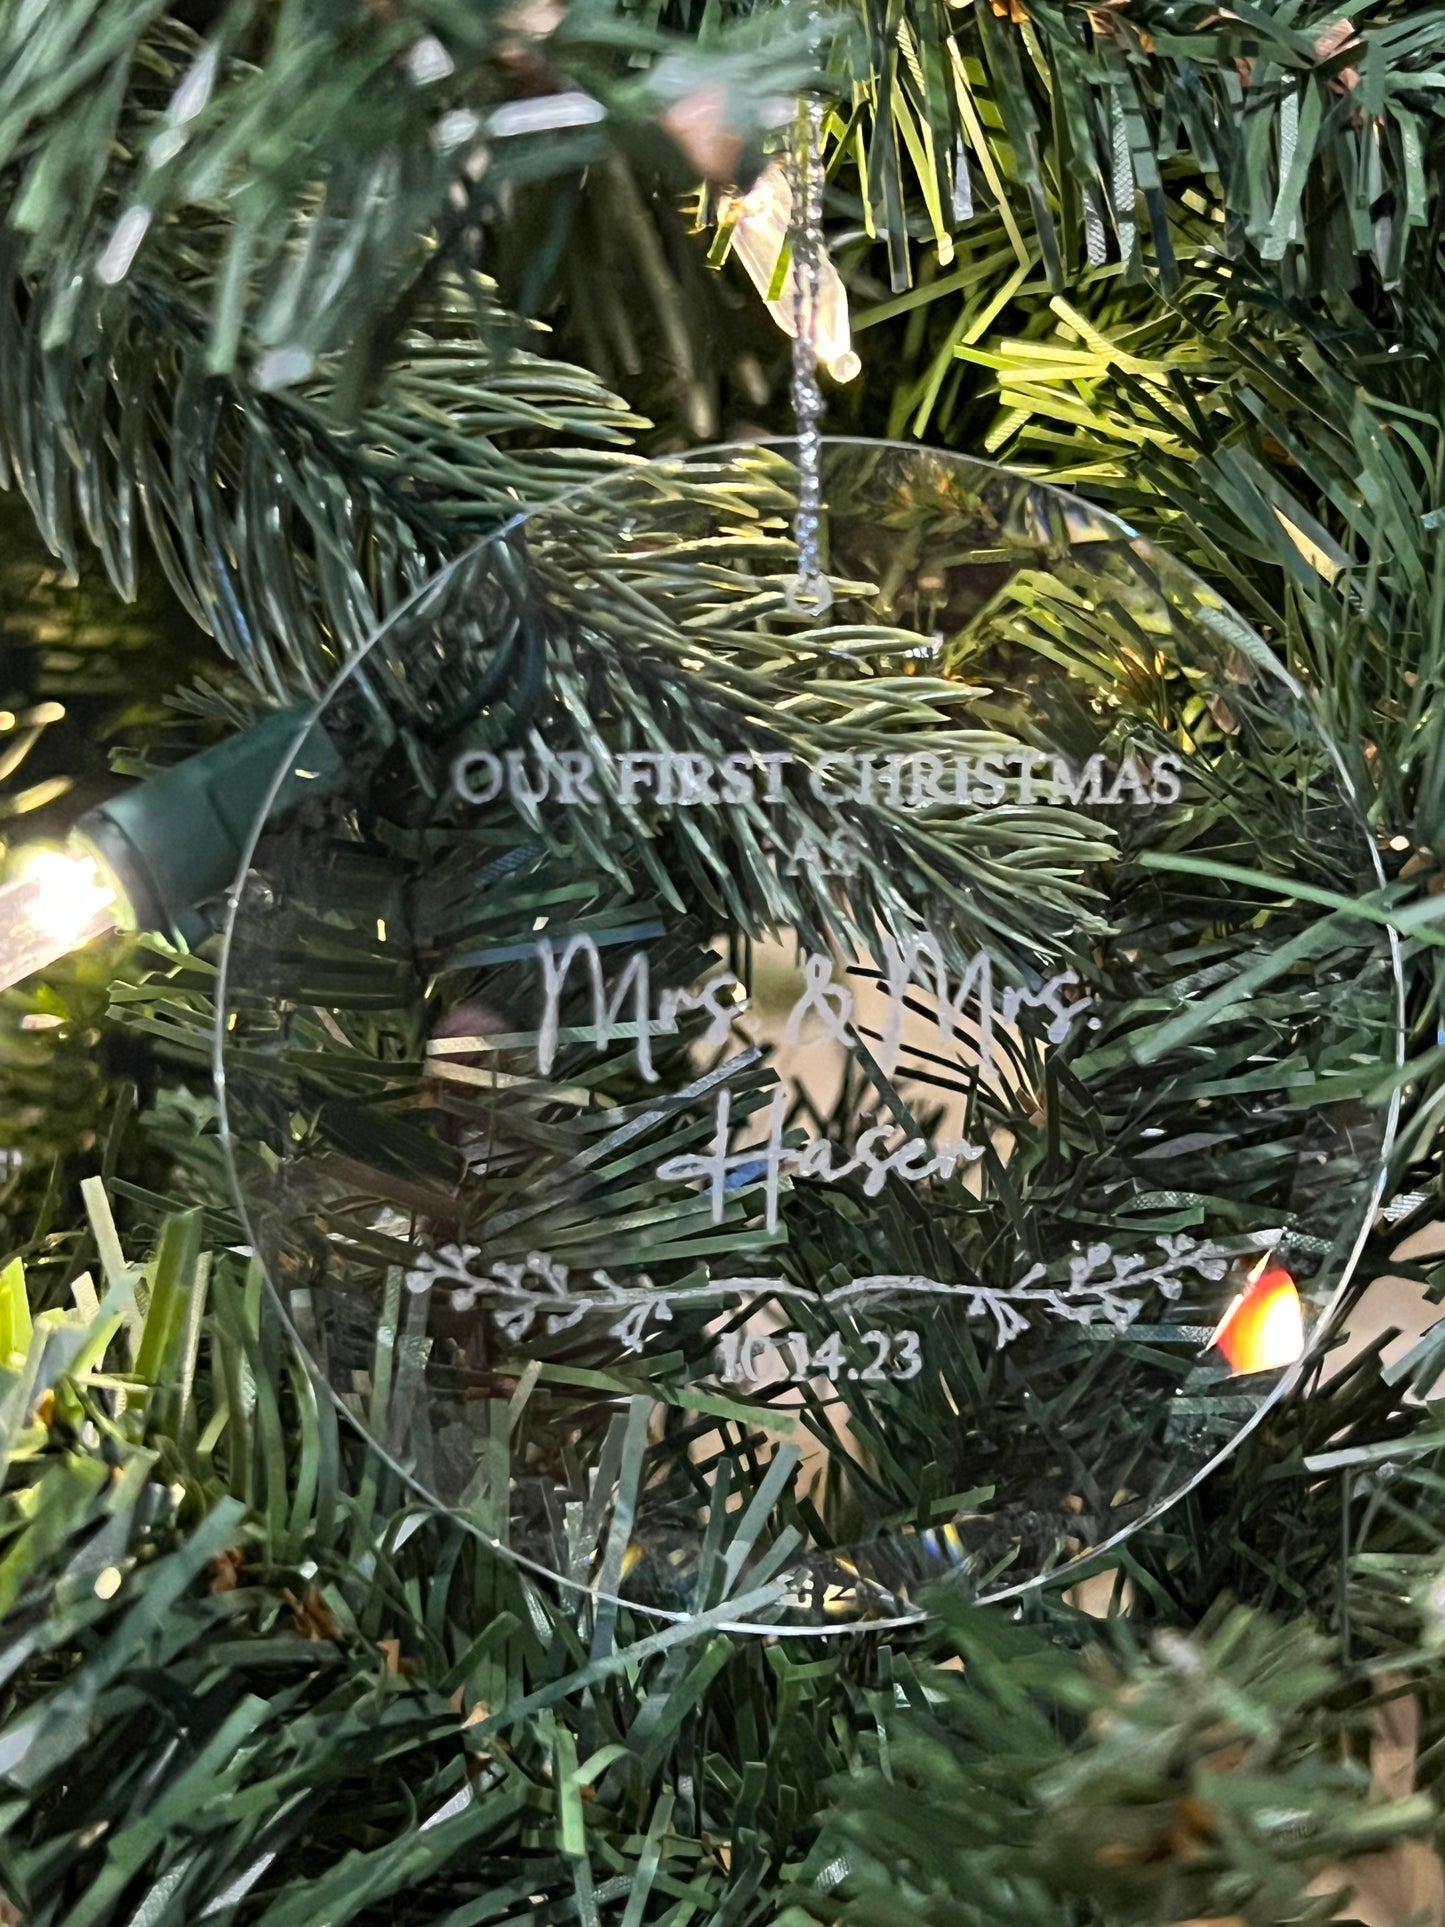 Our First Christmas - Custom Engraved Round Glass Ornament